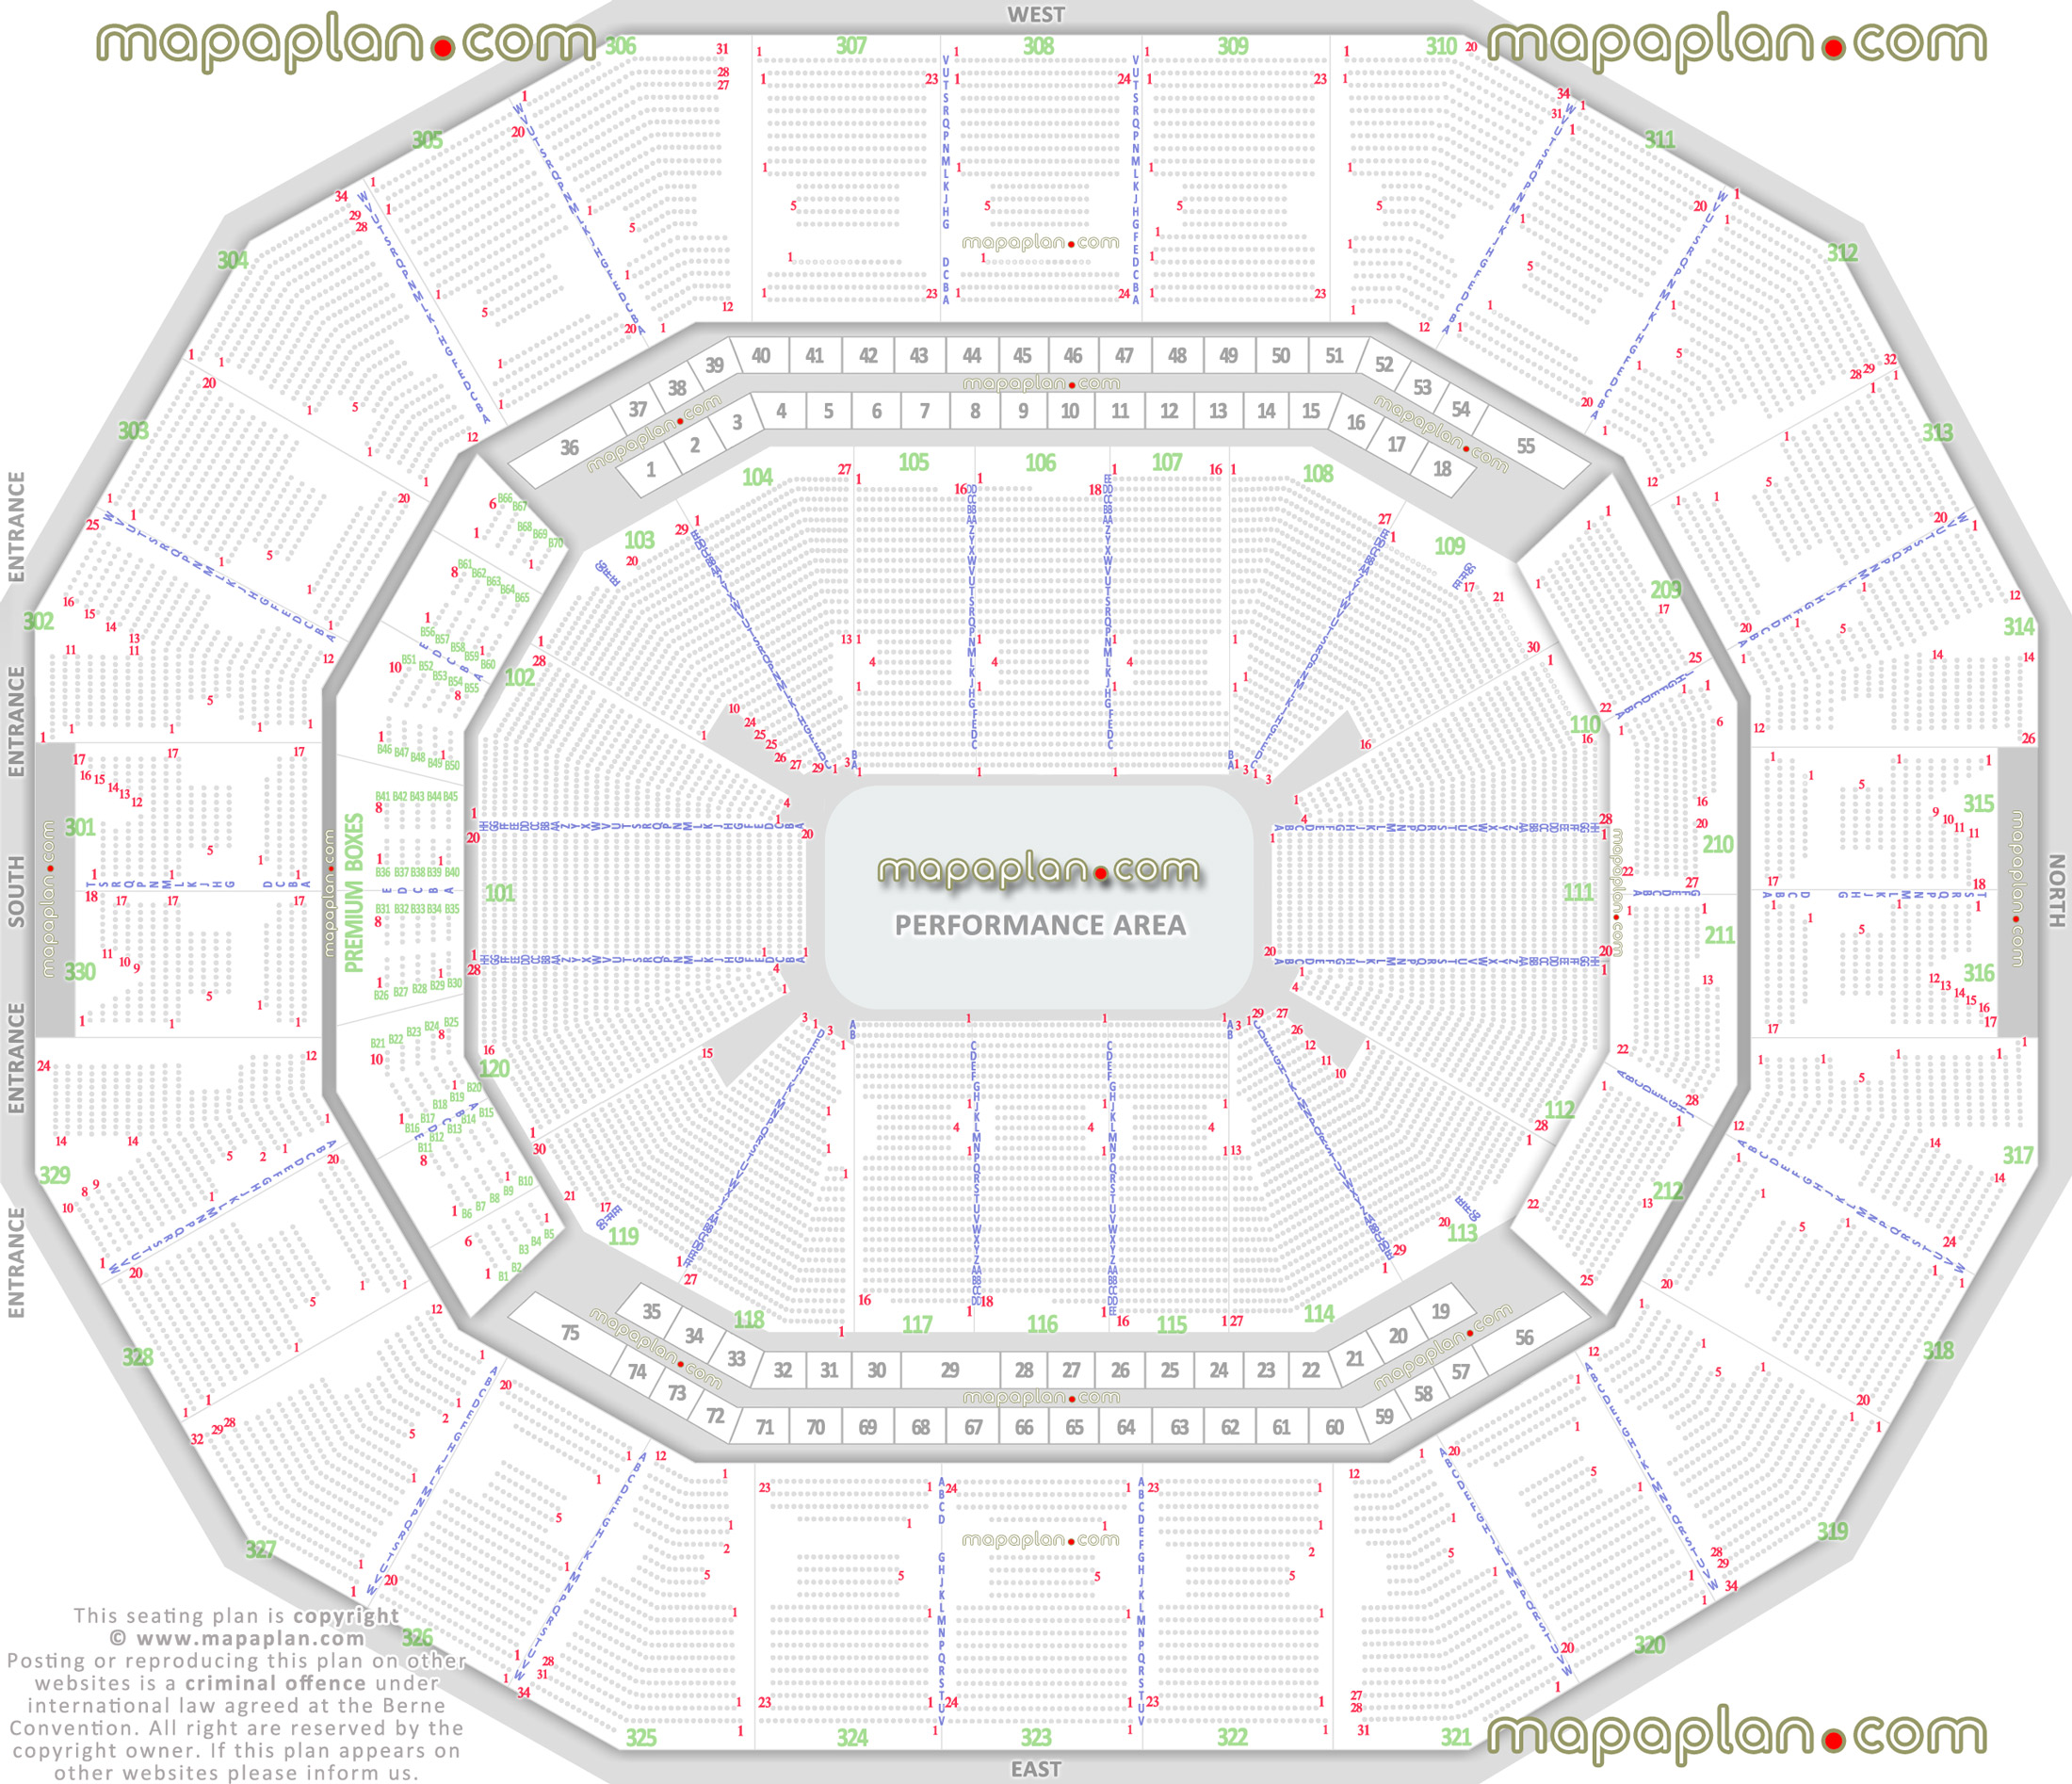 performance area shows half house theater sport events pbr professional bull riders cardinals volleyball ringling bros monster truck jam nitro circus arenacross virtual image how many seats row Louisville KFC Yum! Center seating chart